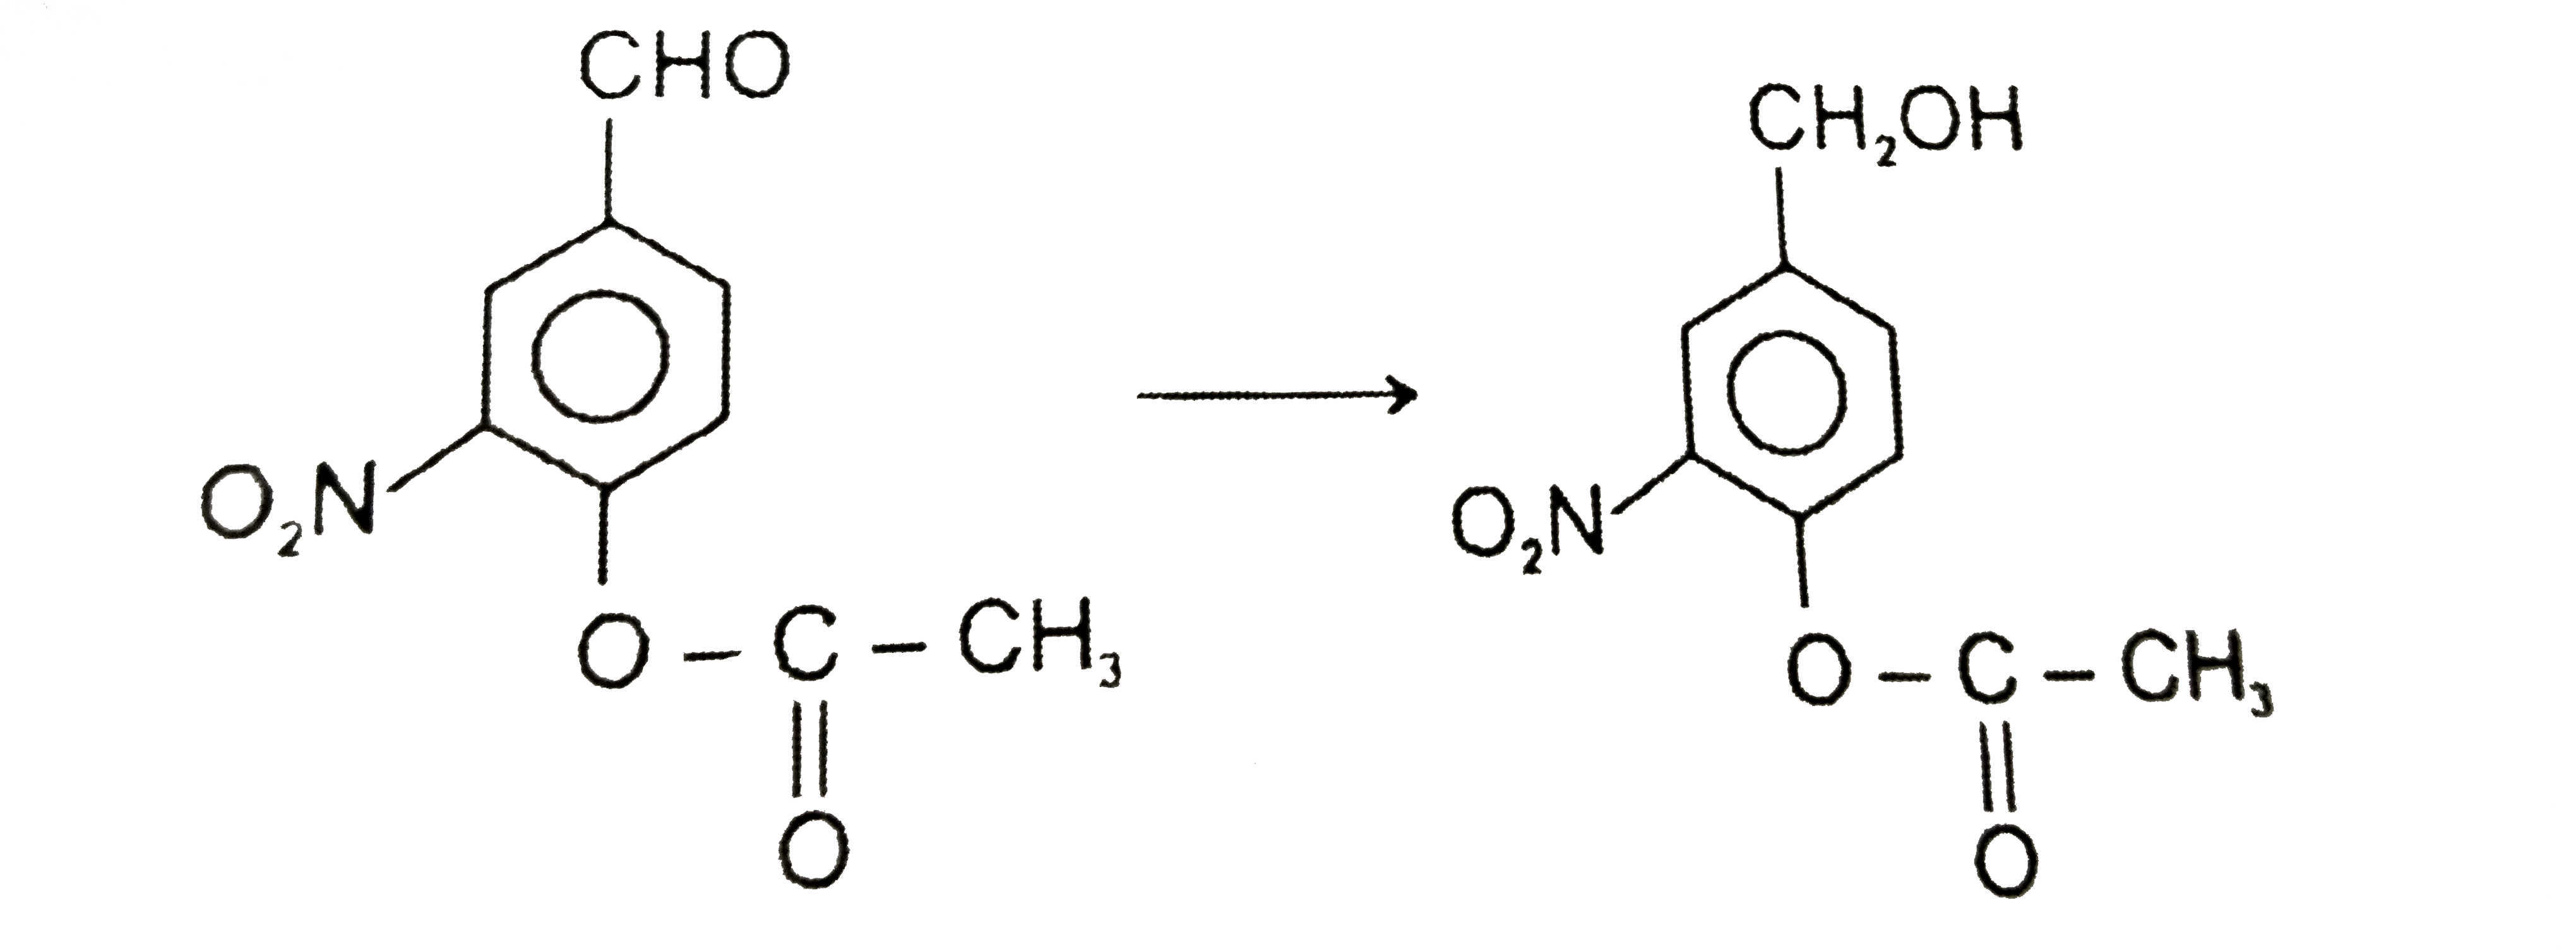 The suitable reagent for the following reactions is